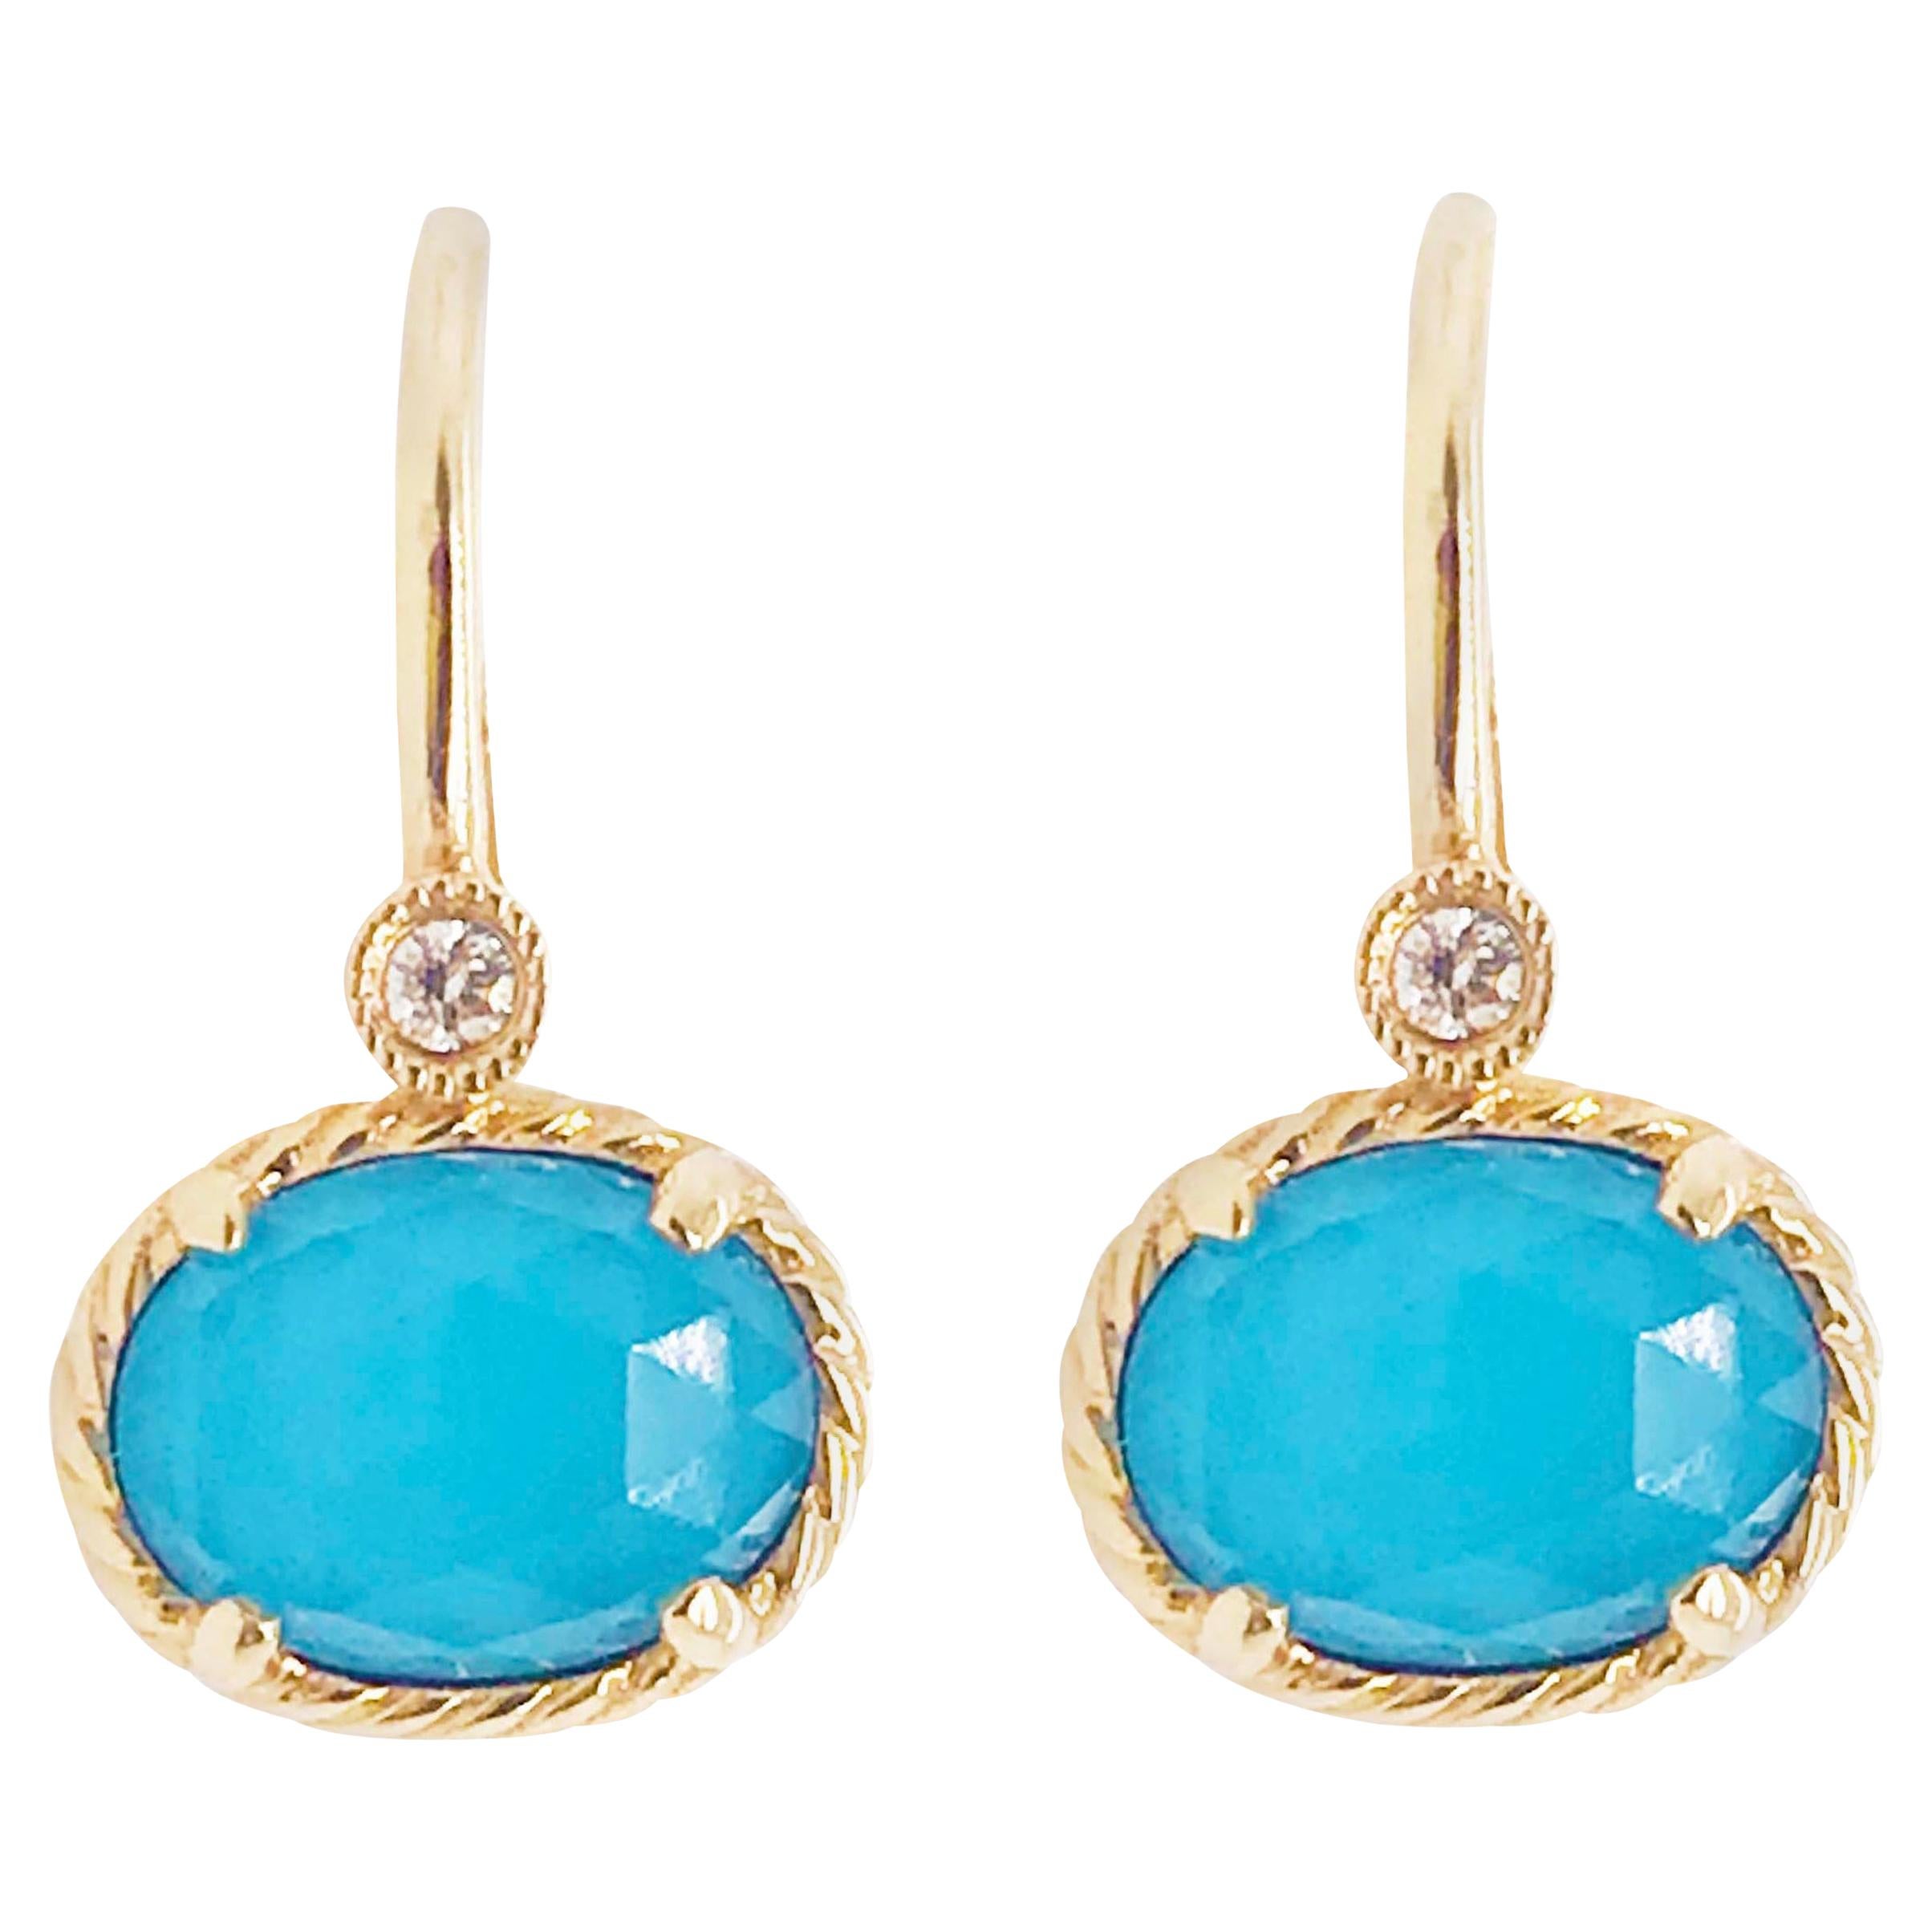 Oval Turquoise Rock Crystal & Diamond Earring Dangles in 14 Karat Gold Turquoise For Sale